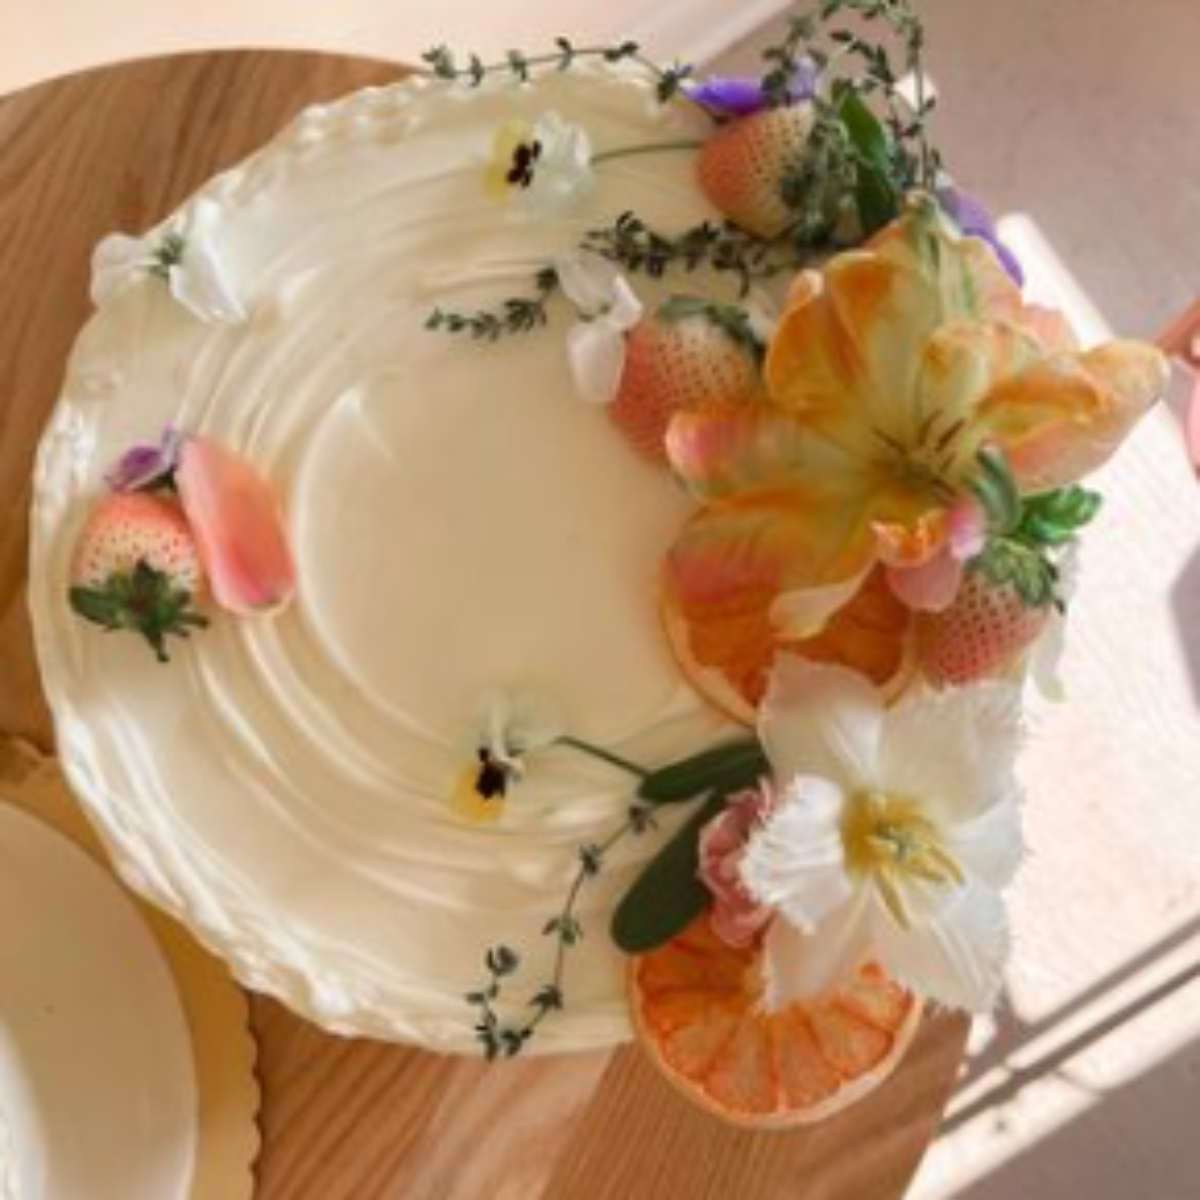 Cake Topped with Flowers from Bramble Baking Co.